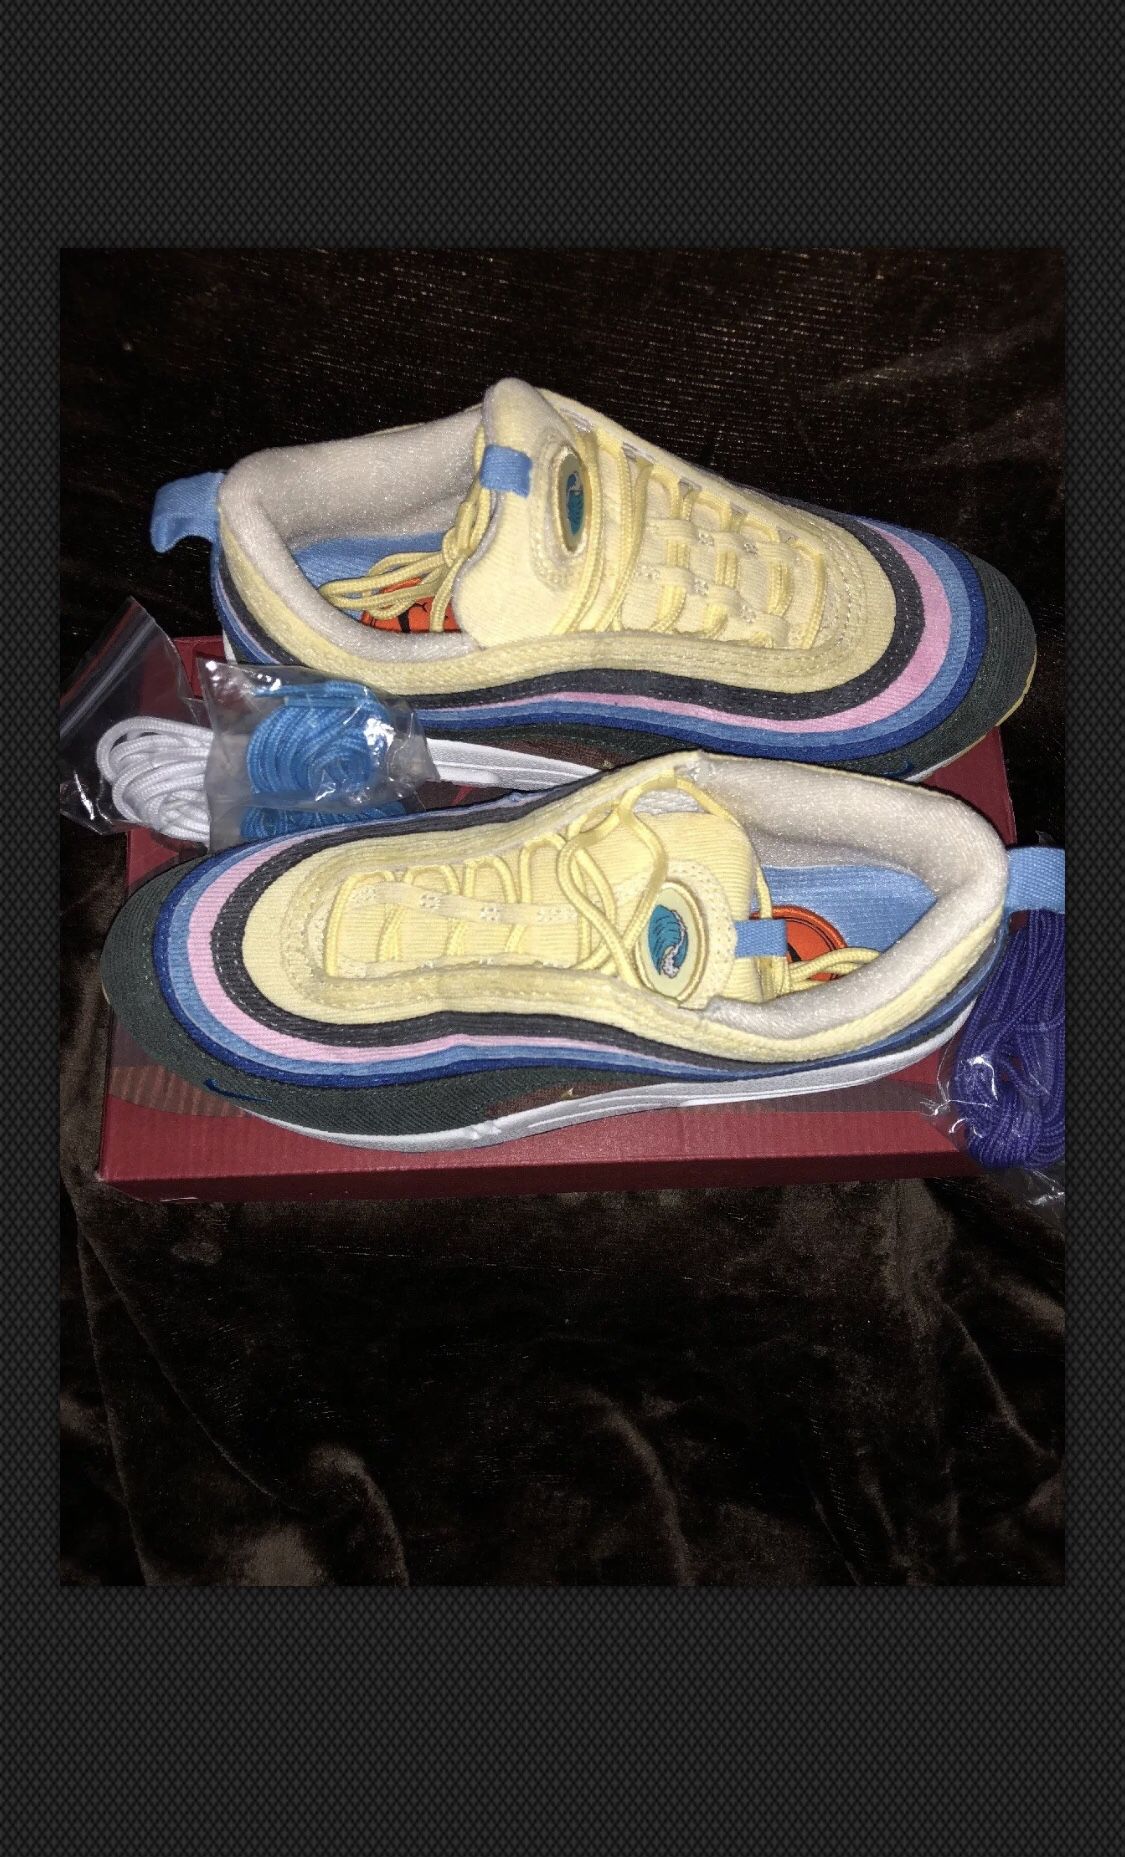 **DEAD STOCK Sean Wotherspoon Nike Air Max 97 size 7 men